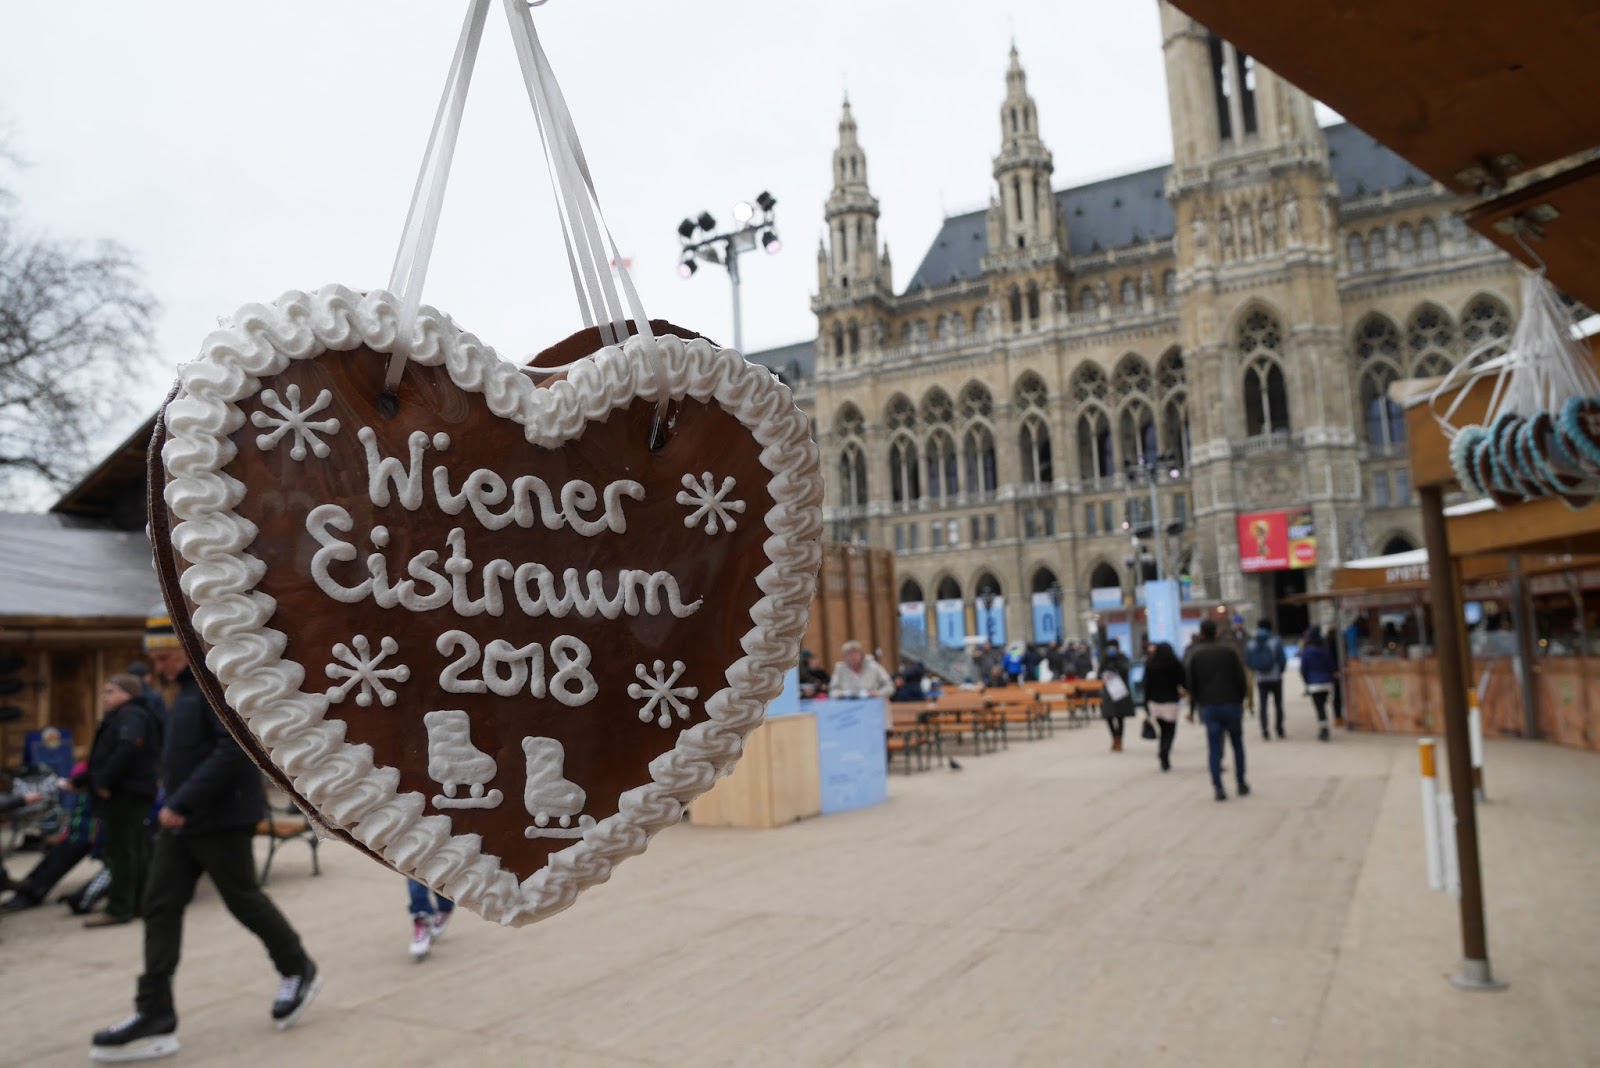 Vienna Winter Festival at the Rathaus (City Hall)